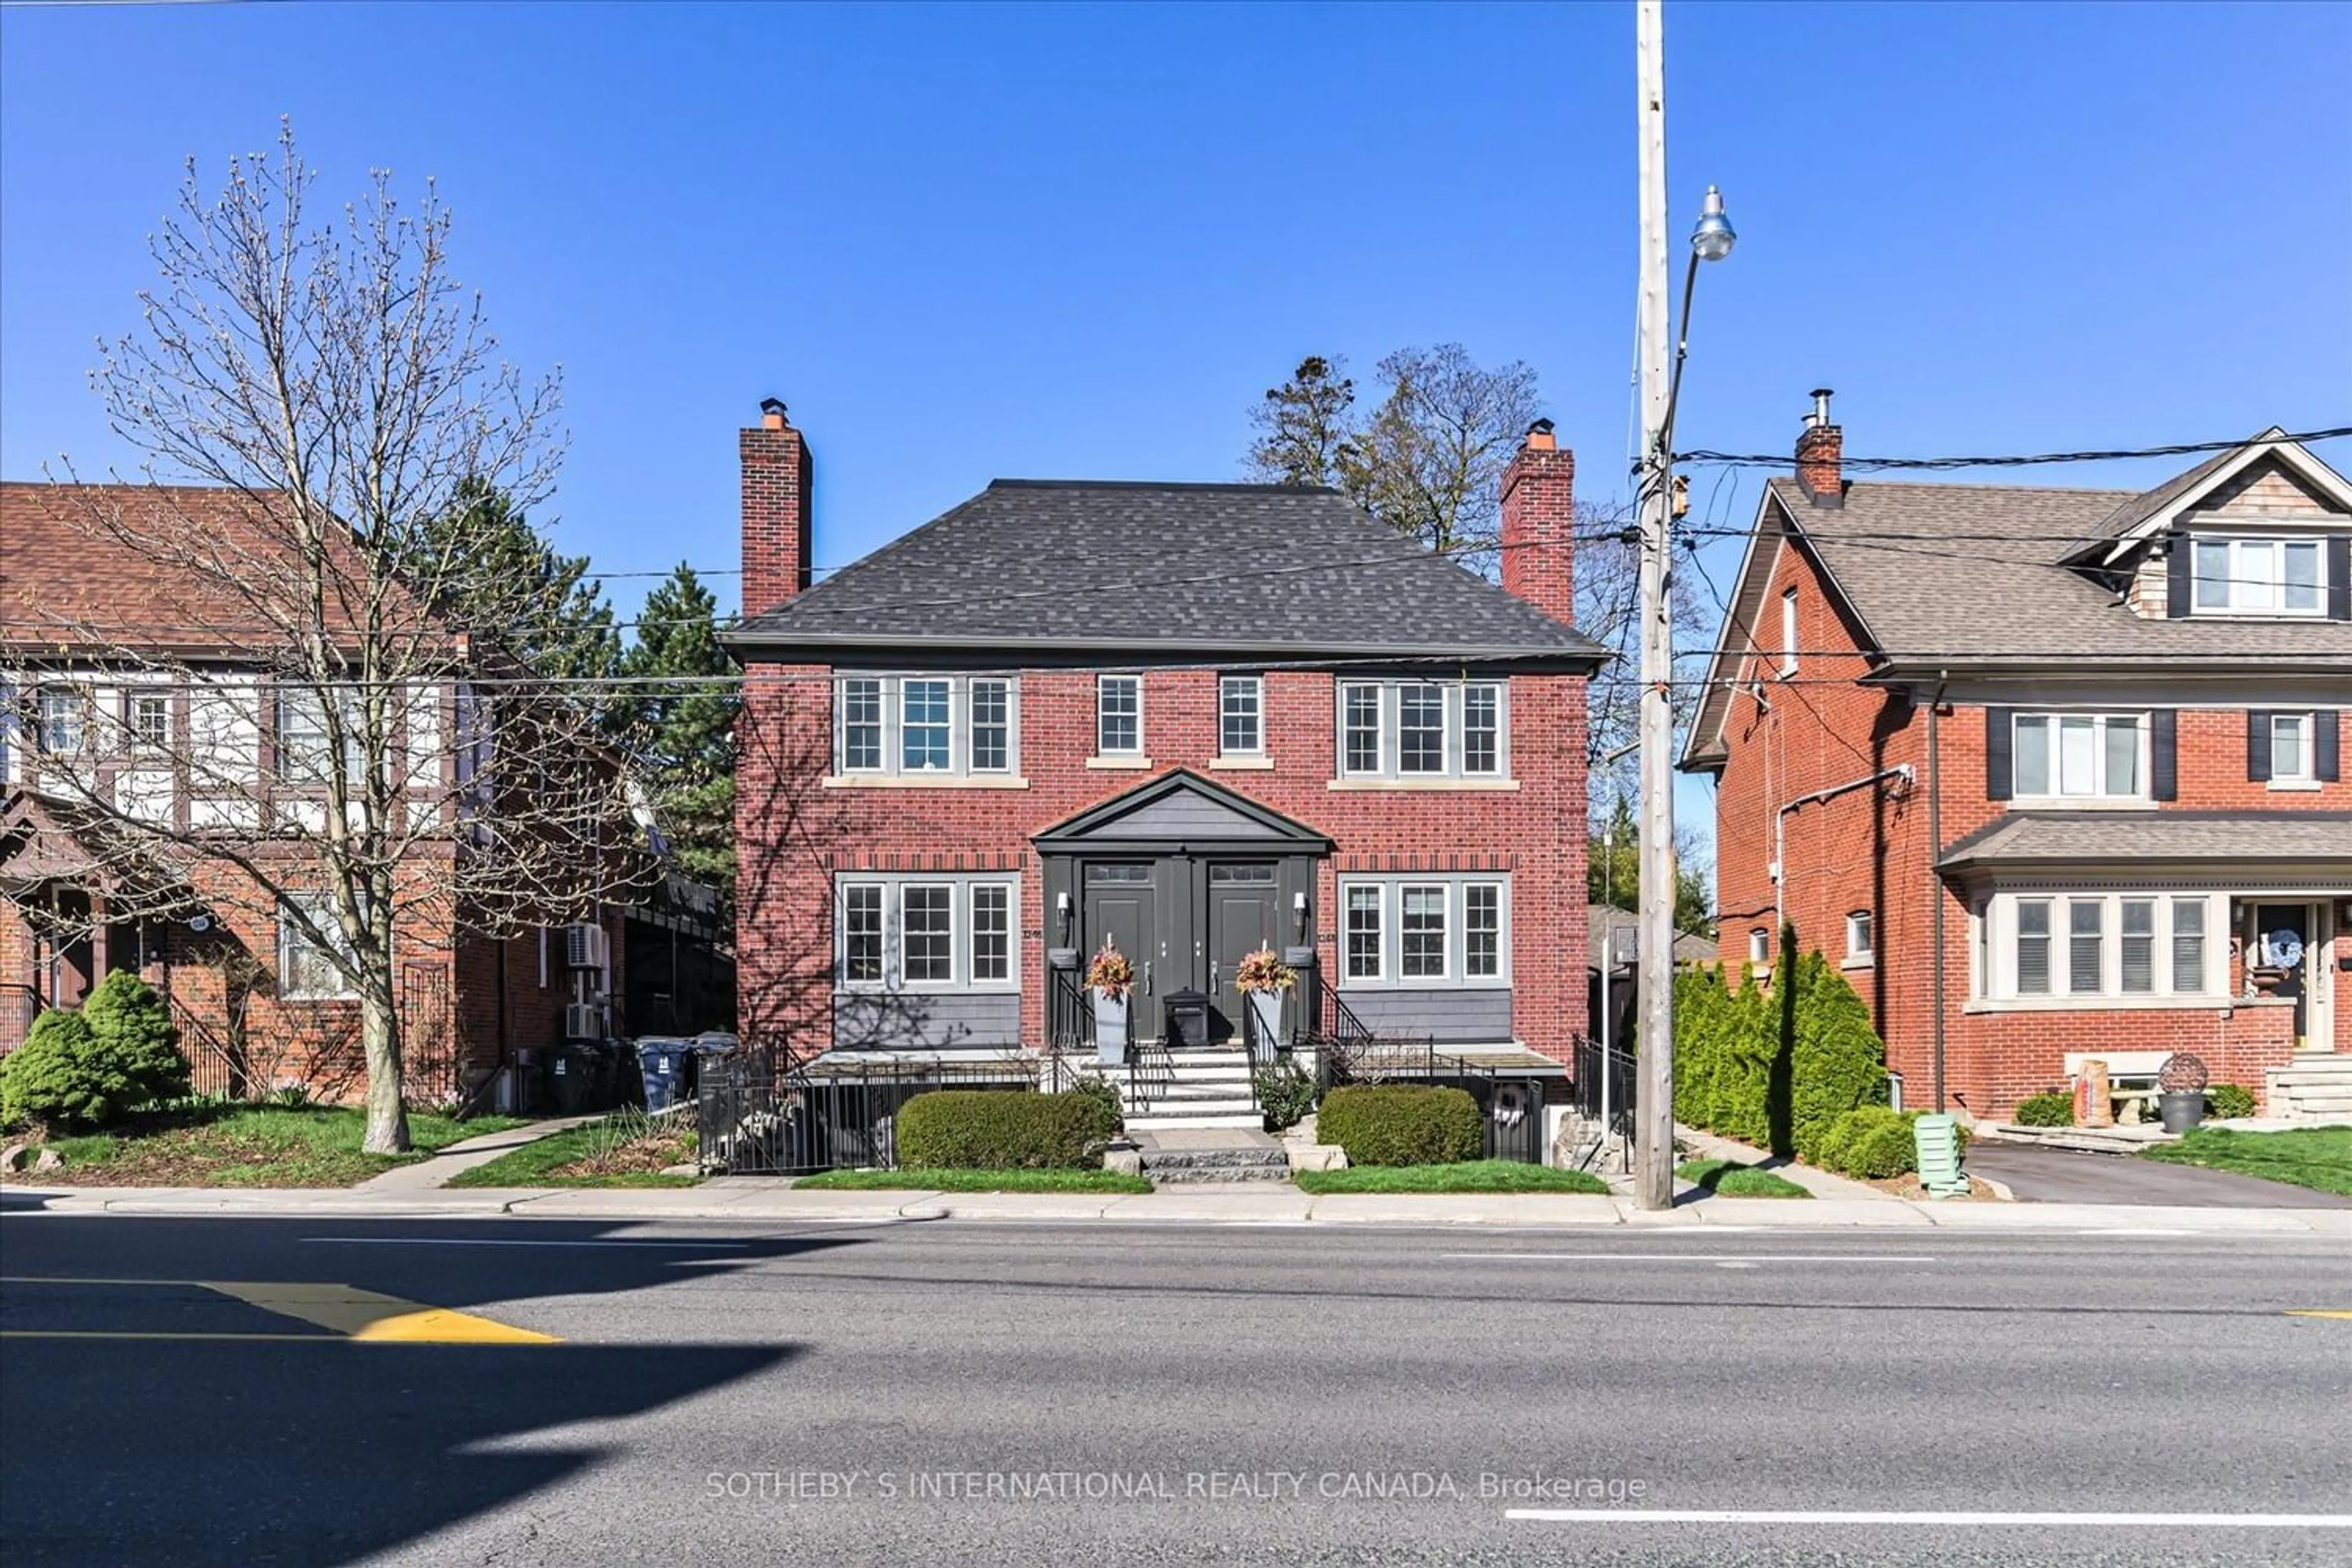 Home with brick exterior material for 1248 Avenue Rd #C, Toronto Ontario M5N 2G7